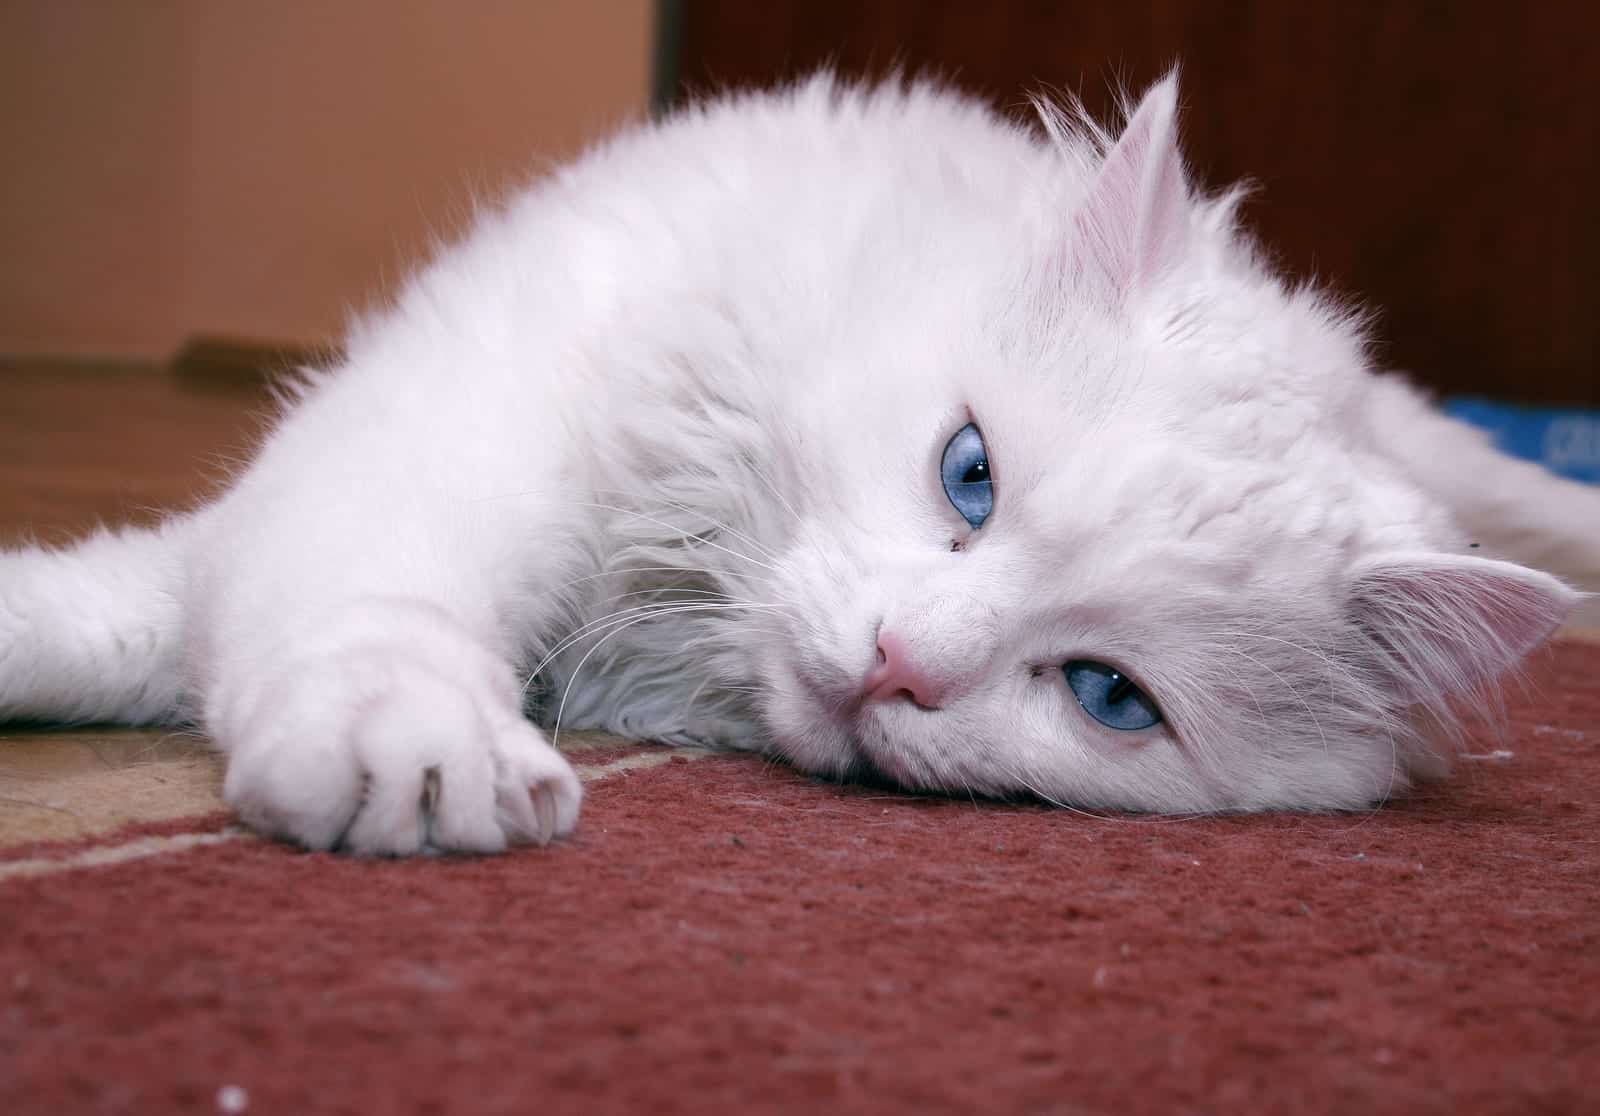 Mesmerizing! Fun Facts About Cats Eye Colors - Cole & Marmalade